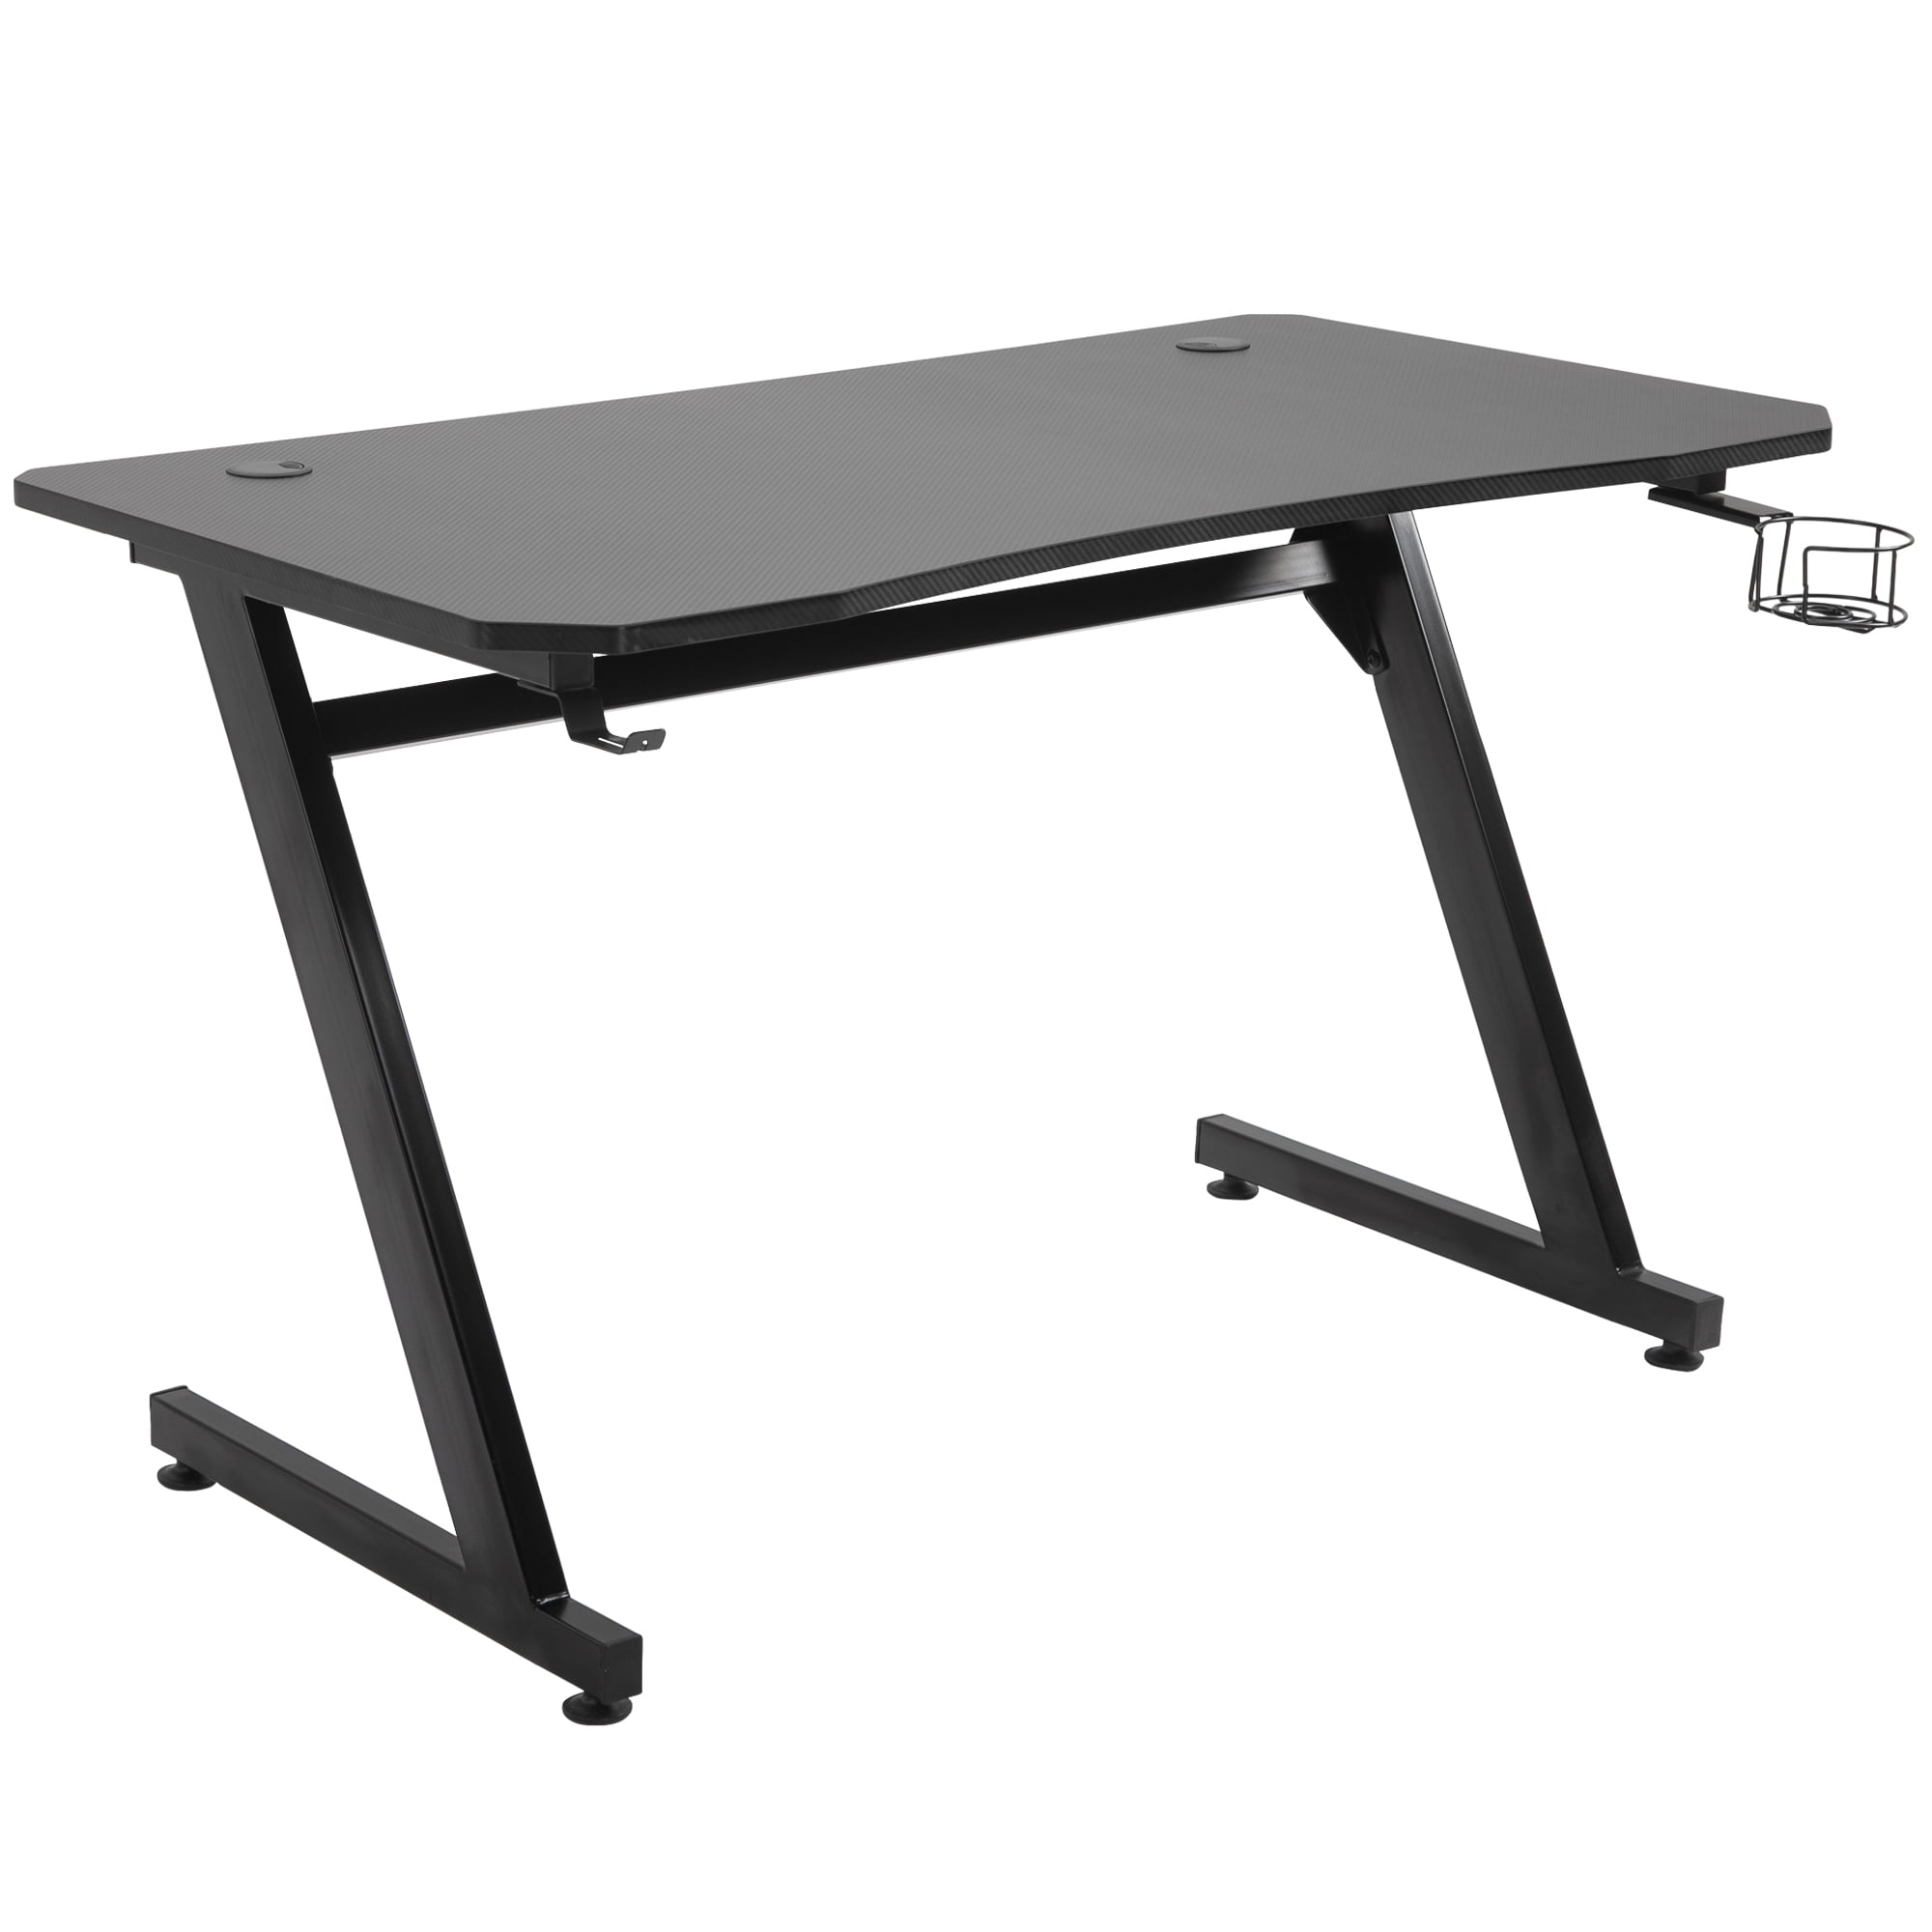 Owsoo 47 25 Gaming Desk Computer Table Metal Frame With Cup Holder Headphone Hook Interior Cable Hole Black Walmart Com Walmart Com